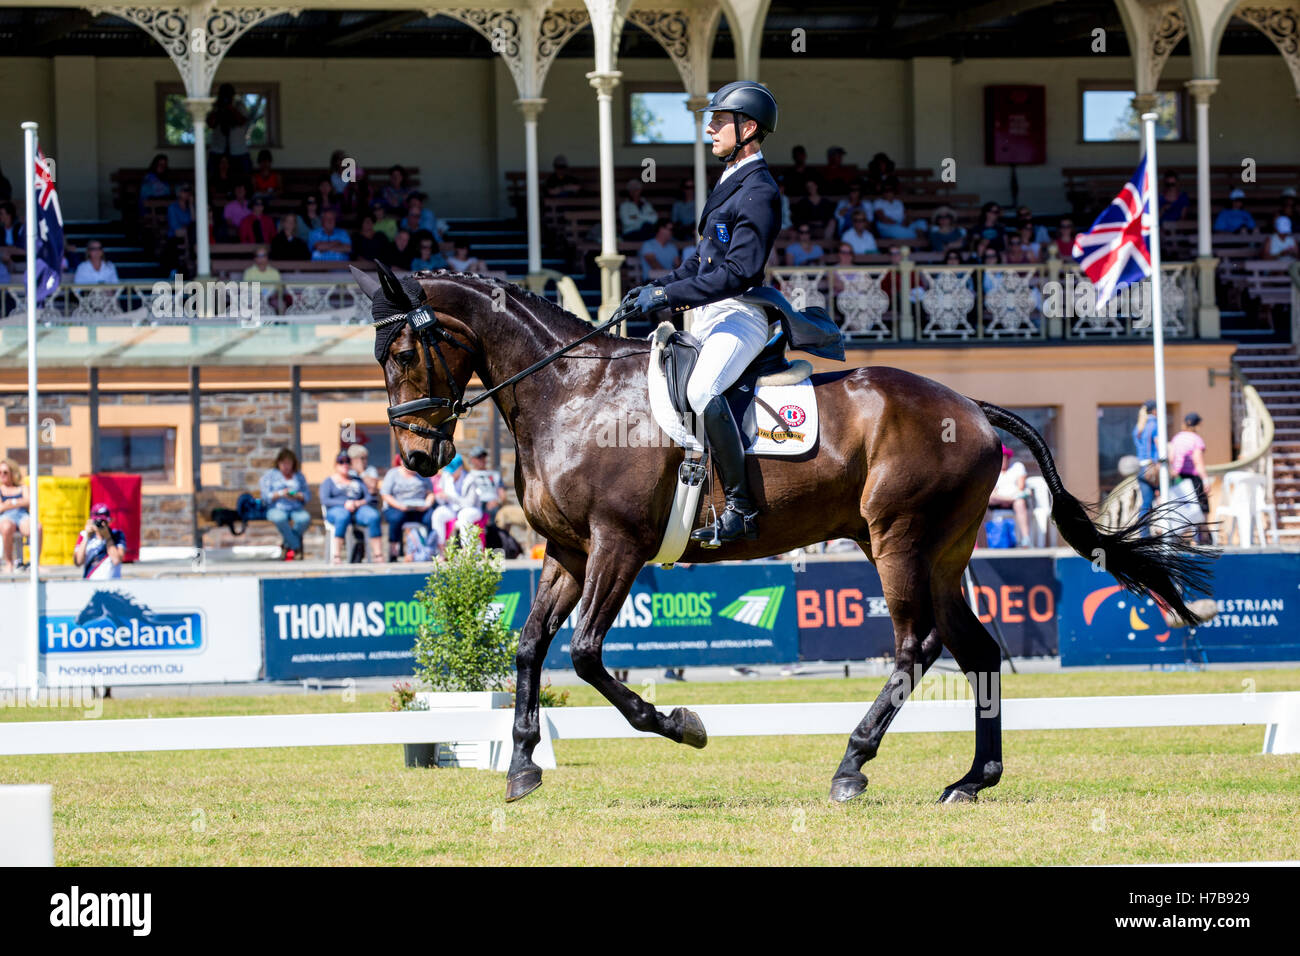 Rohan Luxmoore (AUS) riding Bells N Whistles in the dressage section of the Australian International Three Day Event. Stock Photo